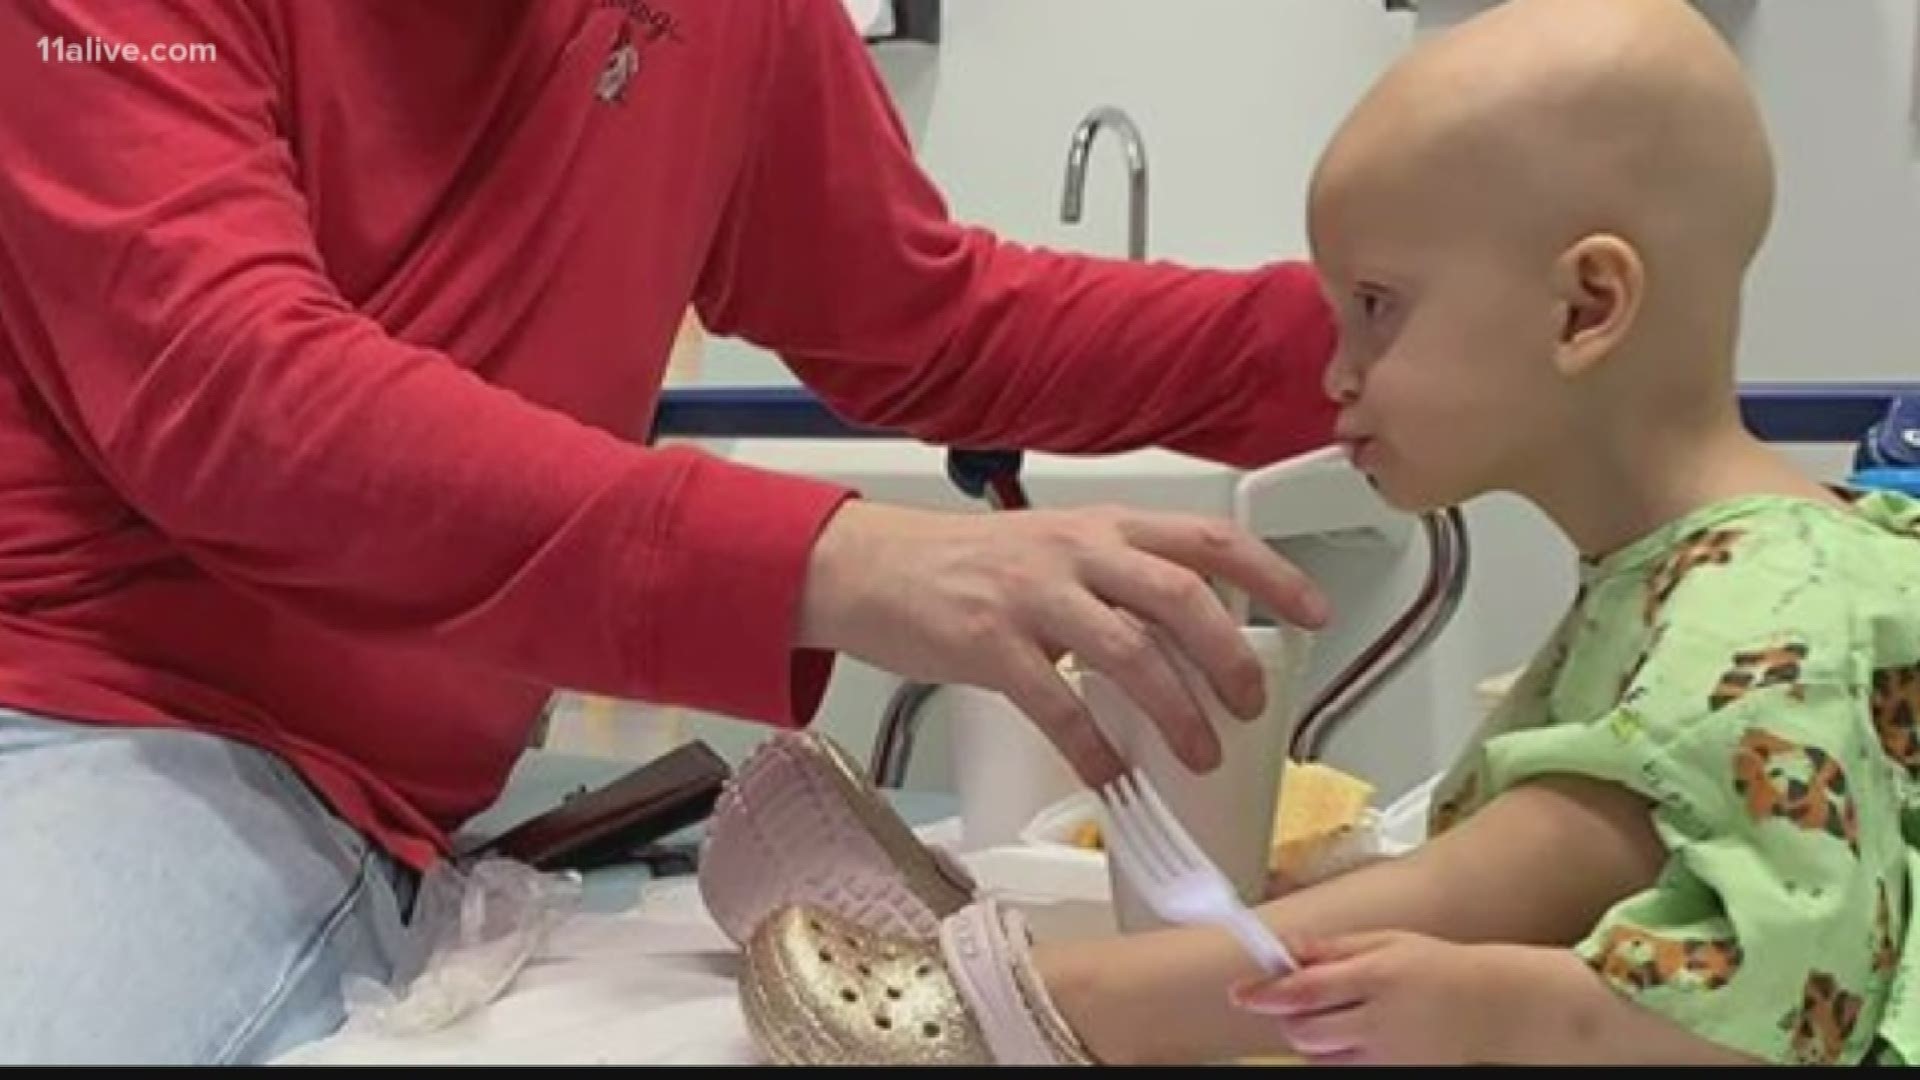 The family of a 1-year-old cancer patient, who had precious items stolen from their car while in Atlanta for treatment, has gotten some of their things back.